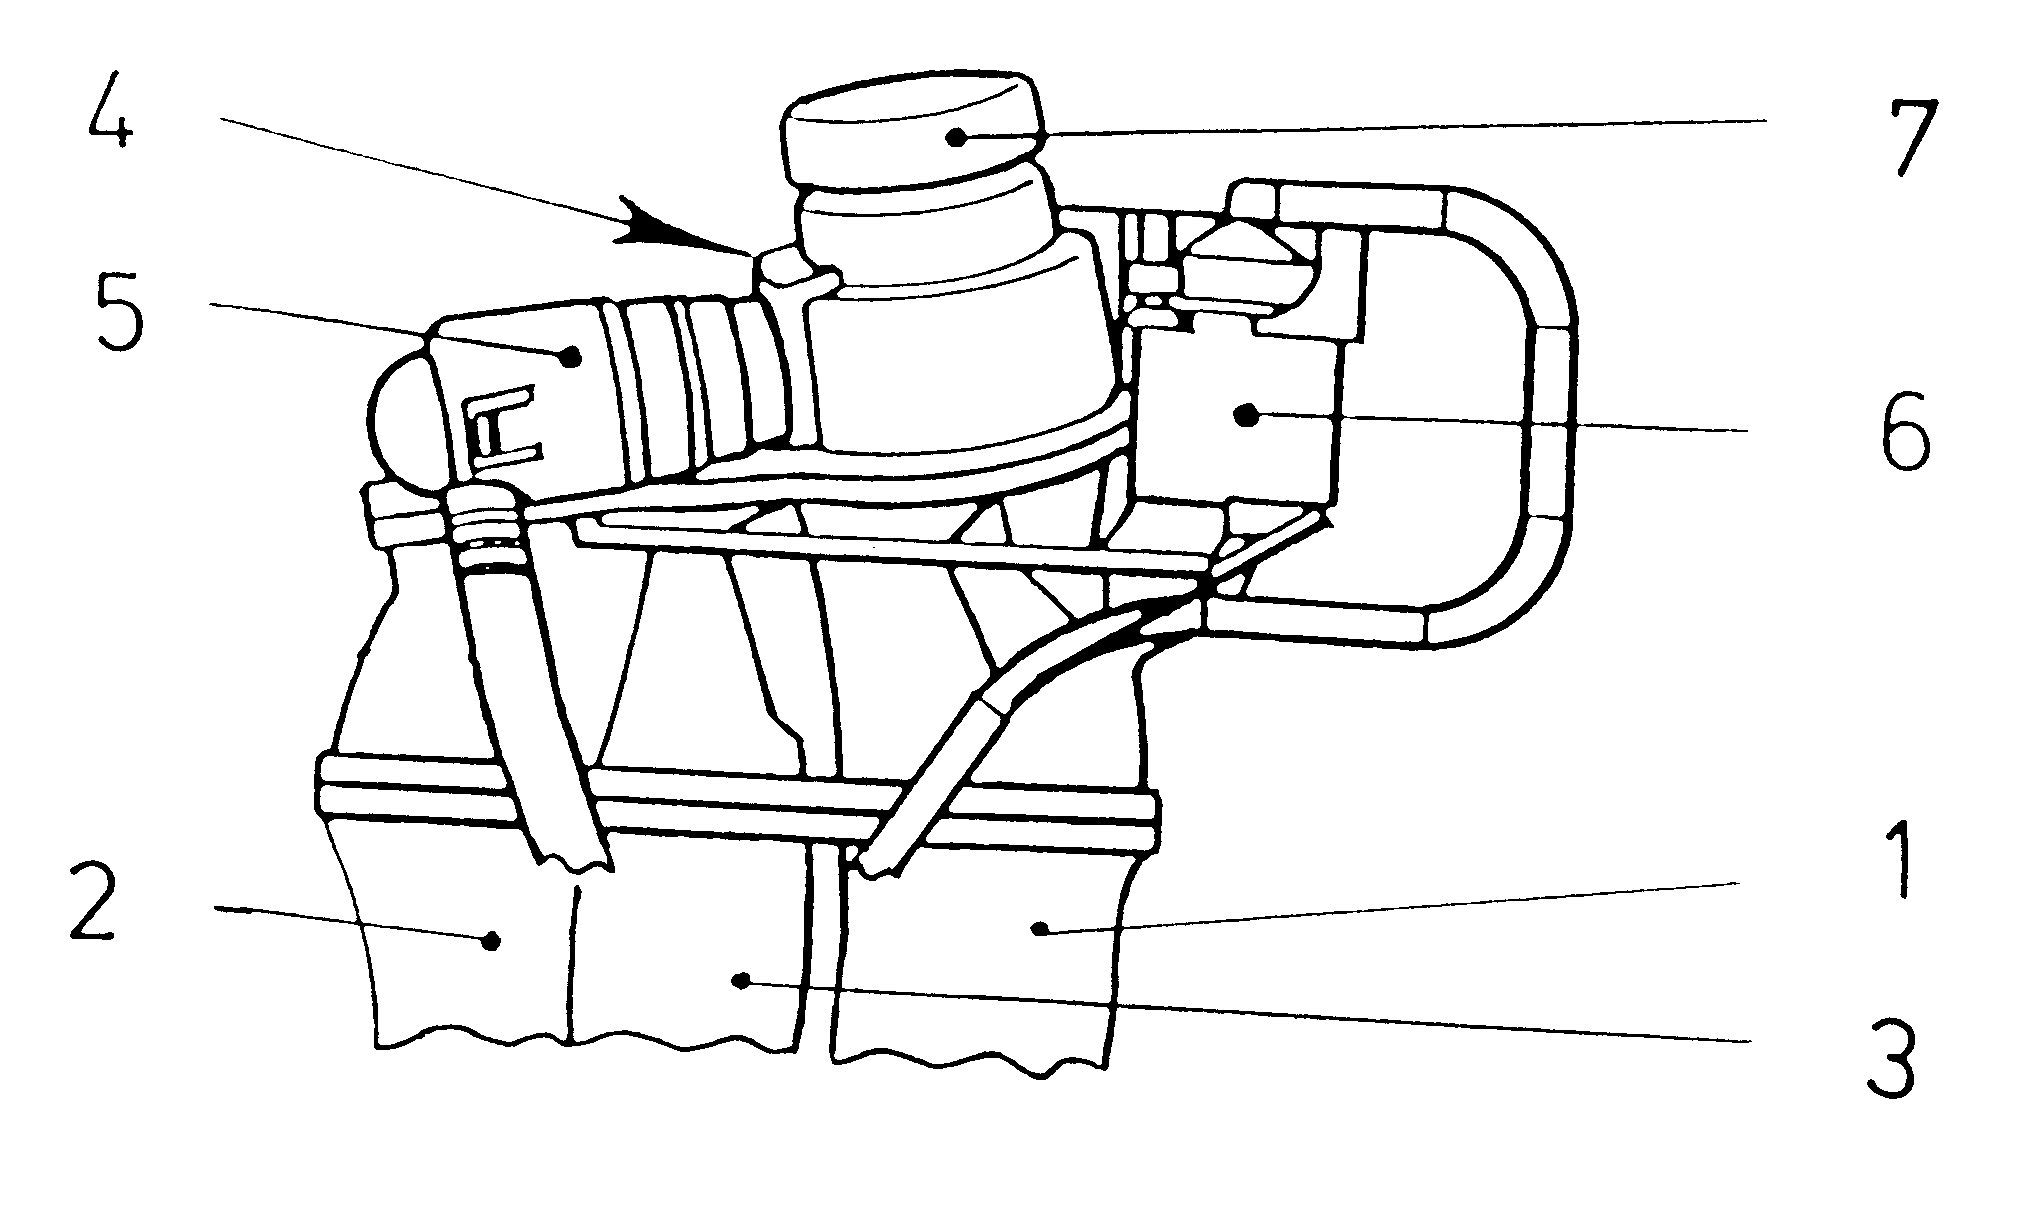 Plug neck for a filler neck of a fuel tank